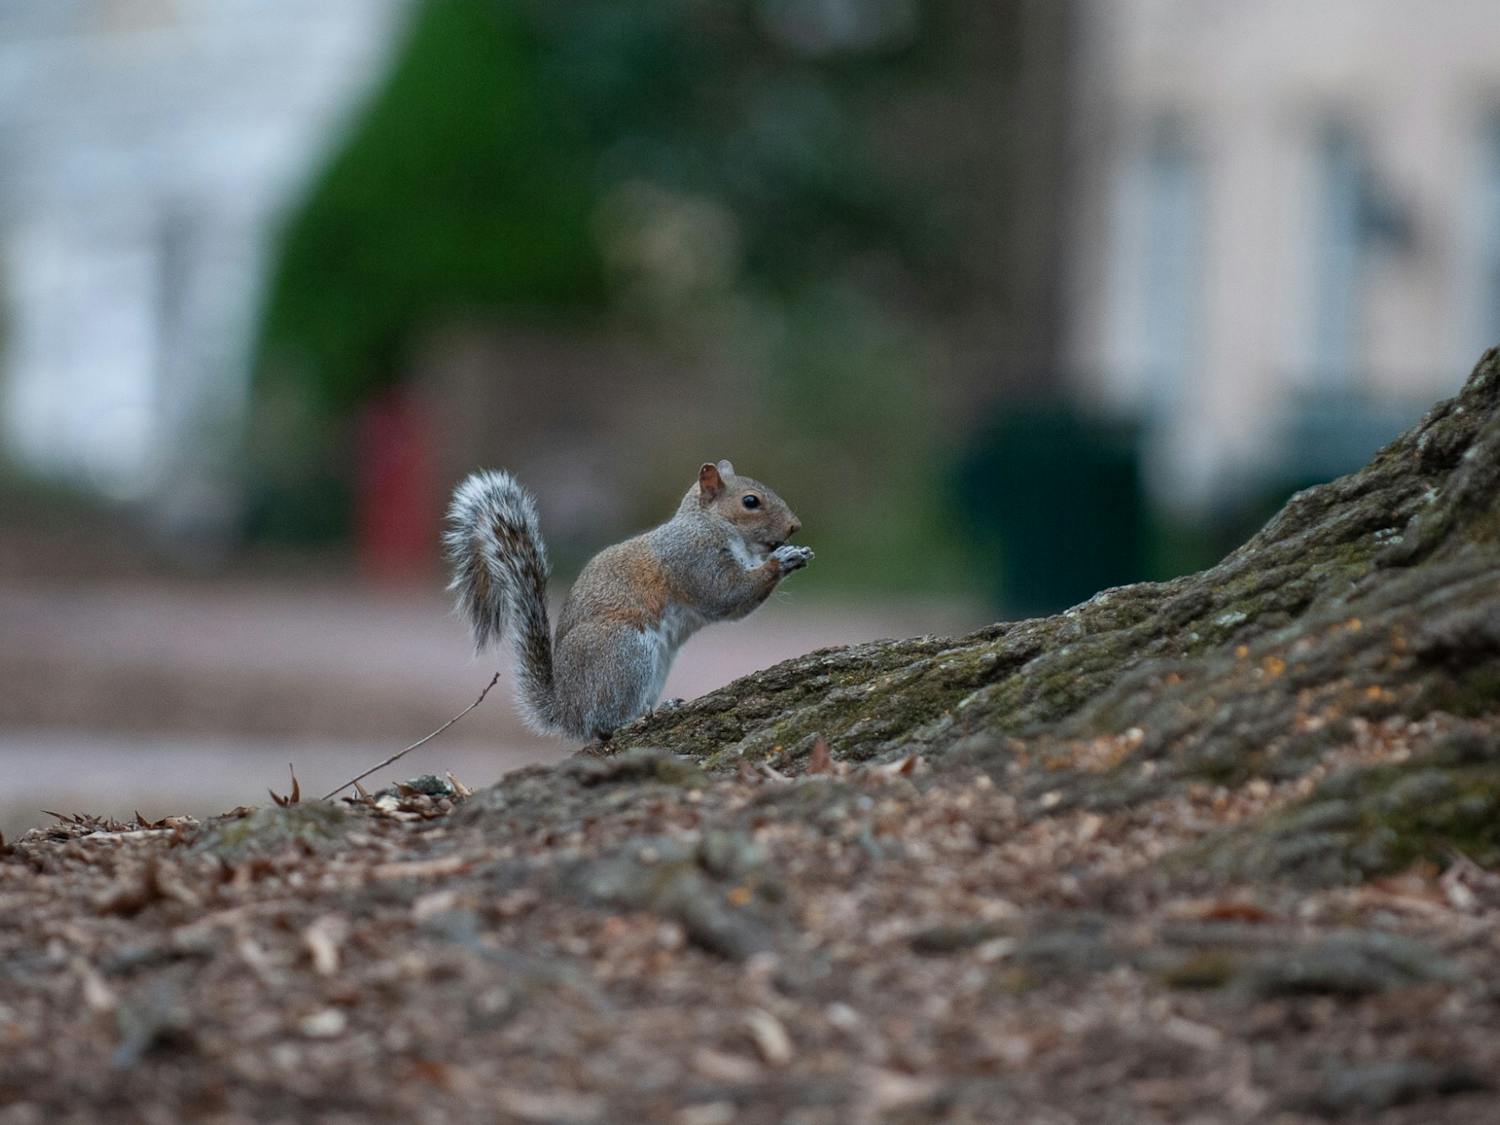 A squirrel sits in USC's Horeshoe beside a tree on Feb. 6, 2022. The Carolina campus is home to several animals including birds, squirrels and cats